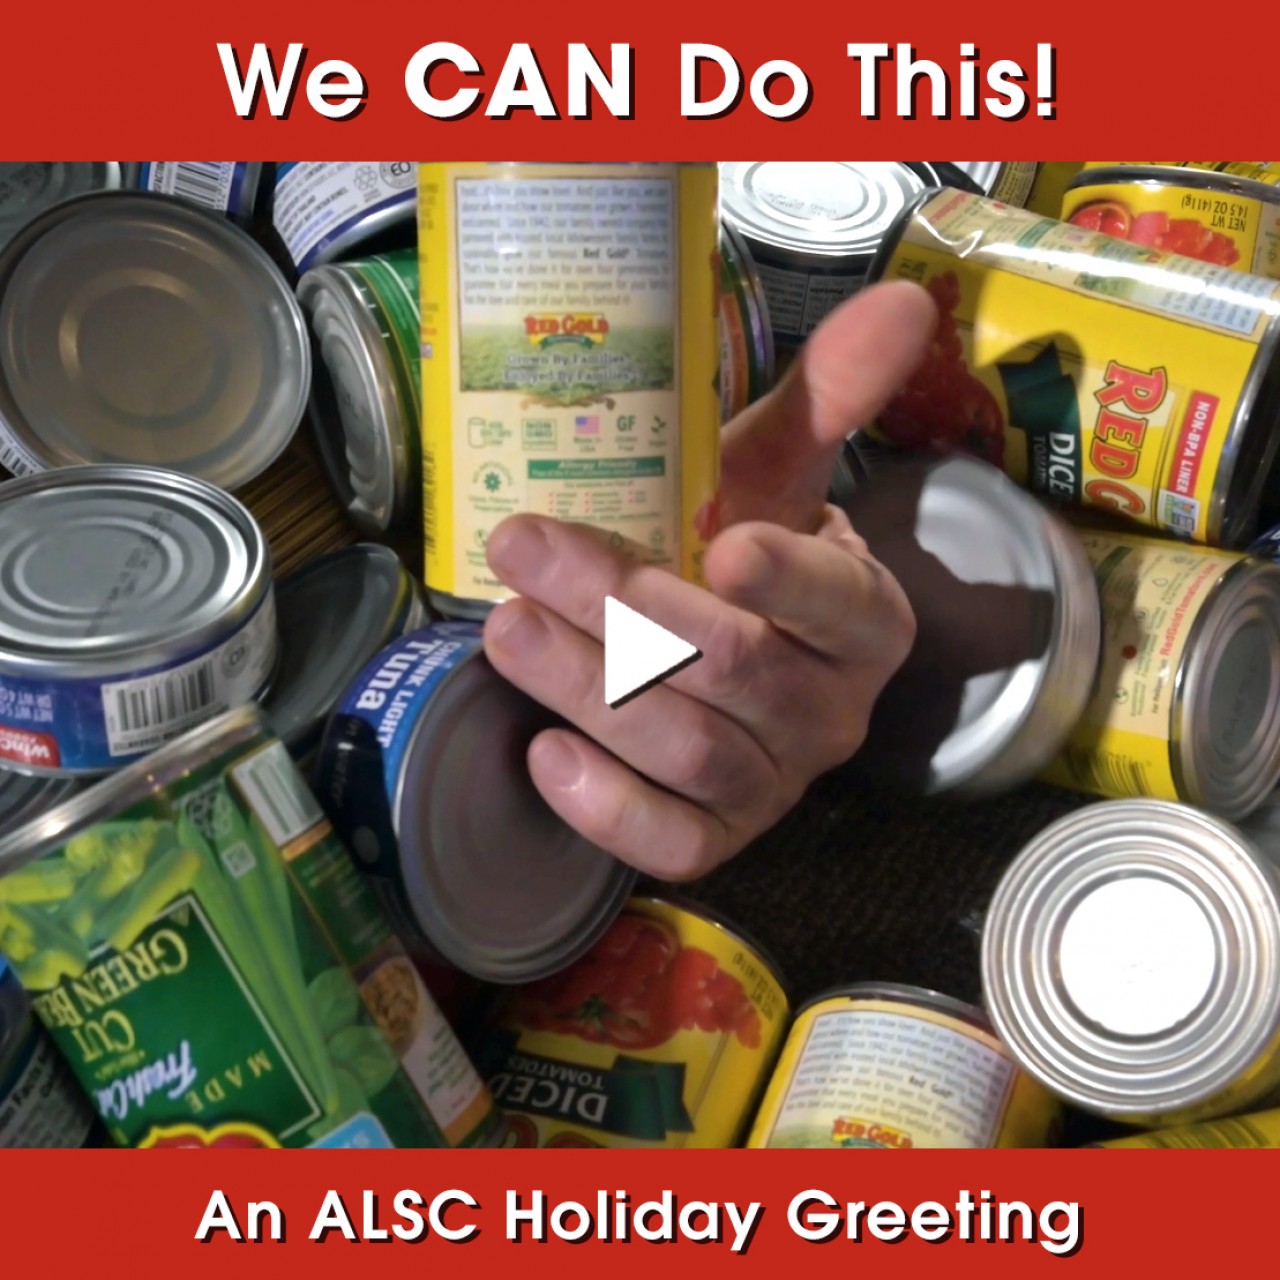 We CAN Do This! An ALSC Holiday Greeting